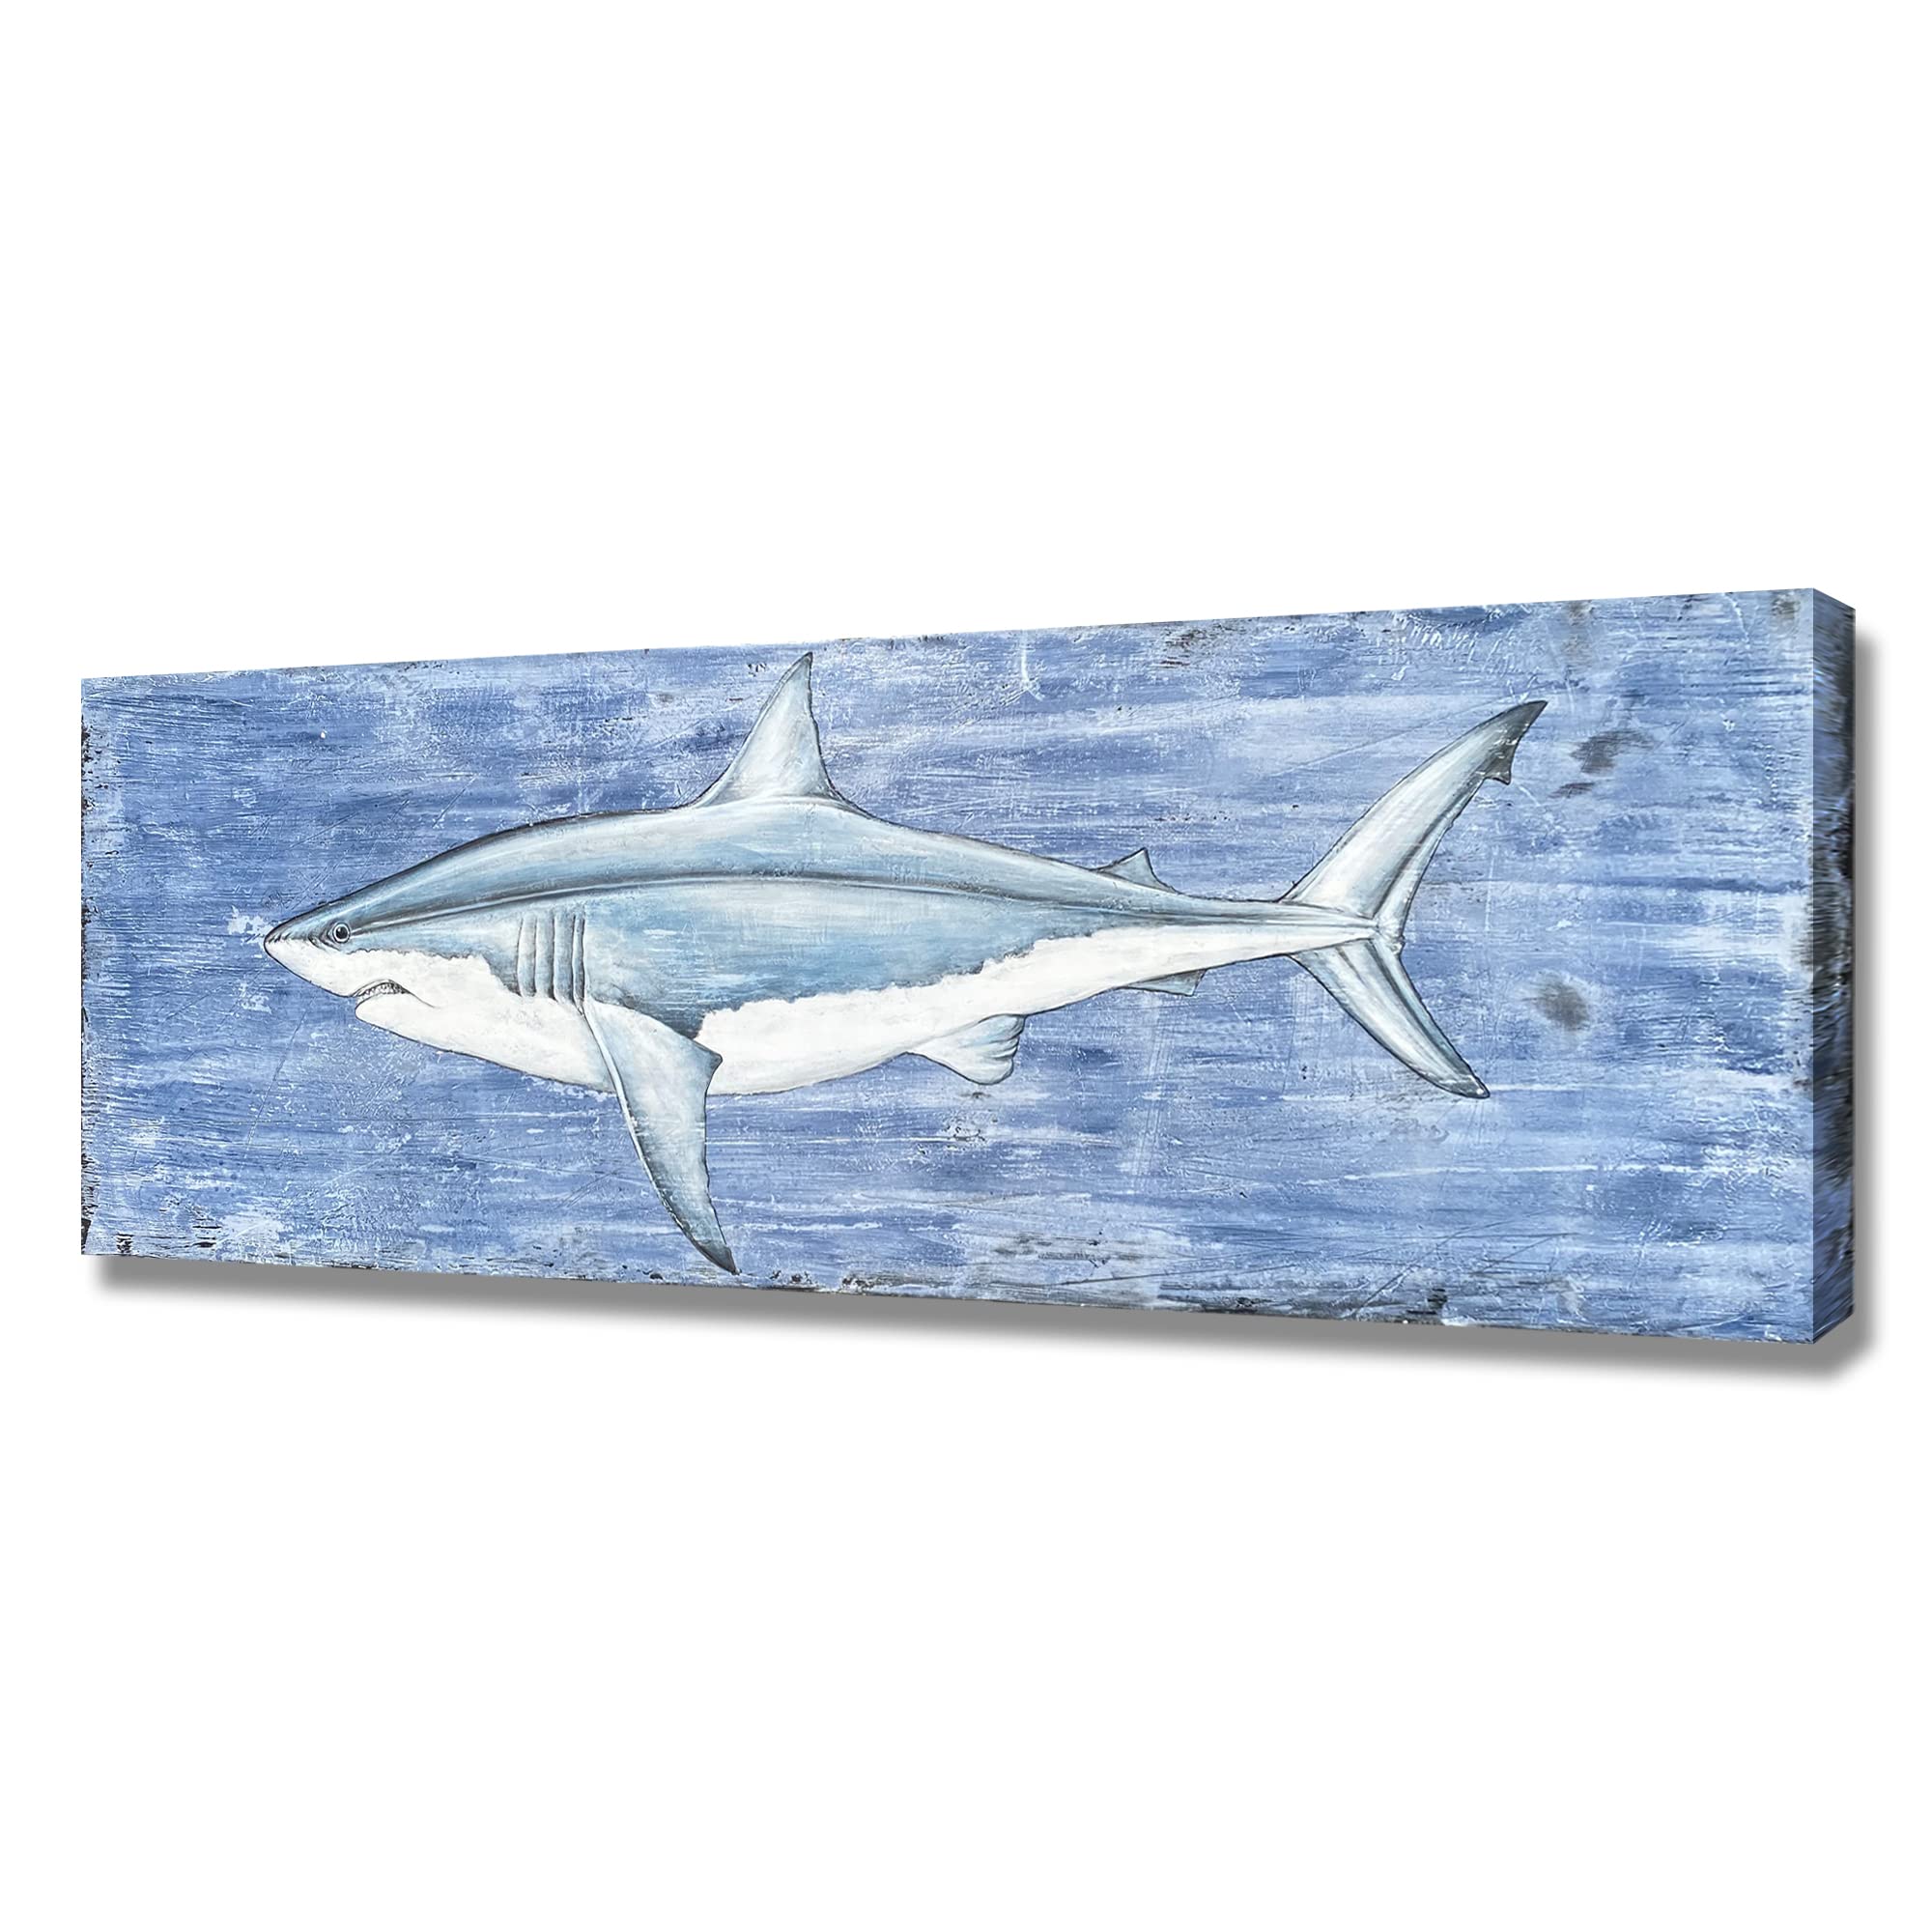 BATRENDY ARTS Shark Canvas Wall Art Blue Coastal Fish Painting Print with Textures Abstract Nautical Animal Picture for Livingroom Bedroom Bathroom